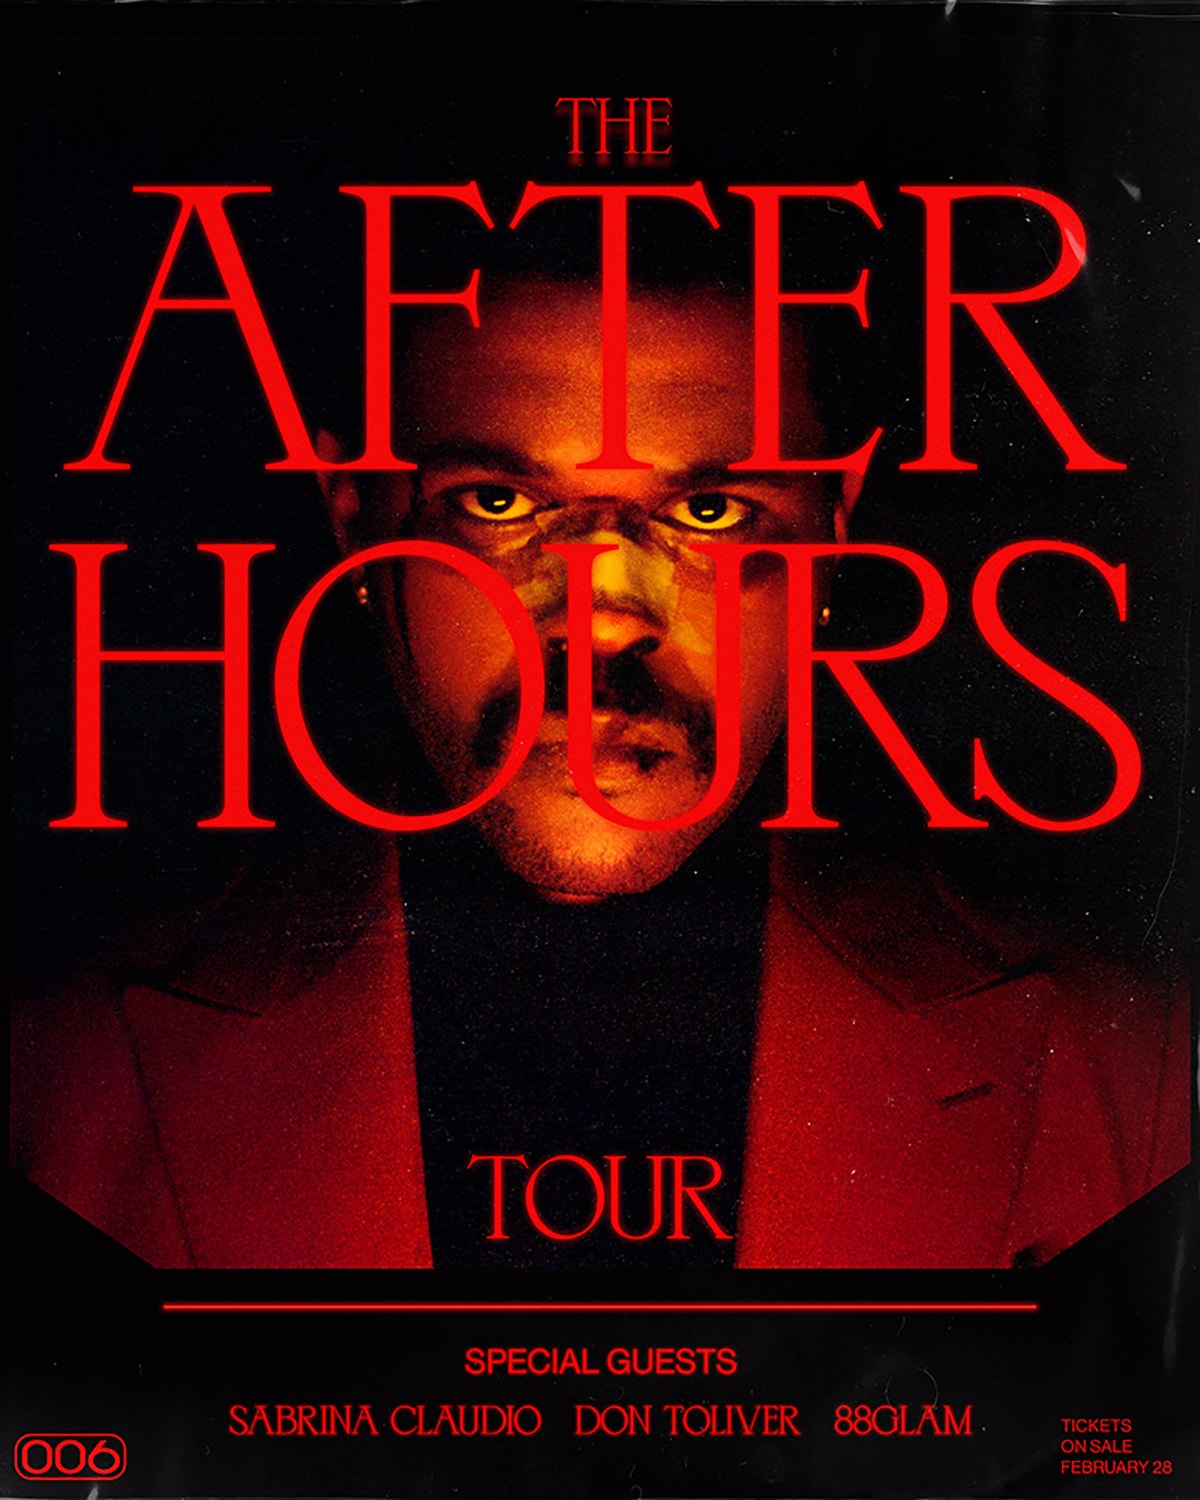 The Weeknd 'After Hours' Tour Dates for Europe featuring Don Toliver Sabrina Claudio 88GLAM Live Music UK New Music O2 Arena Listen Watch HYPEBEAST Toronto London